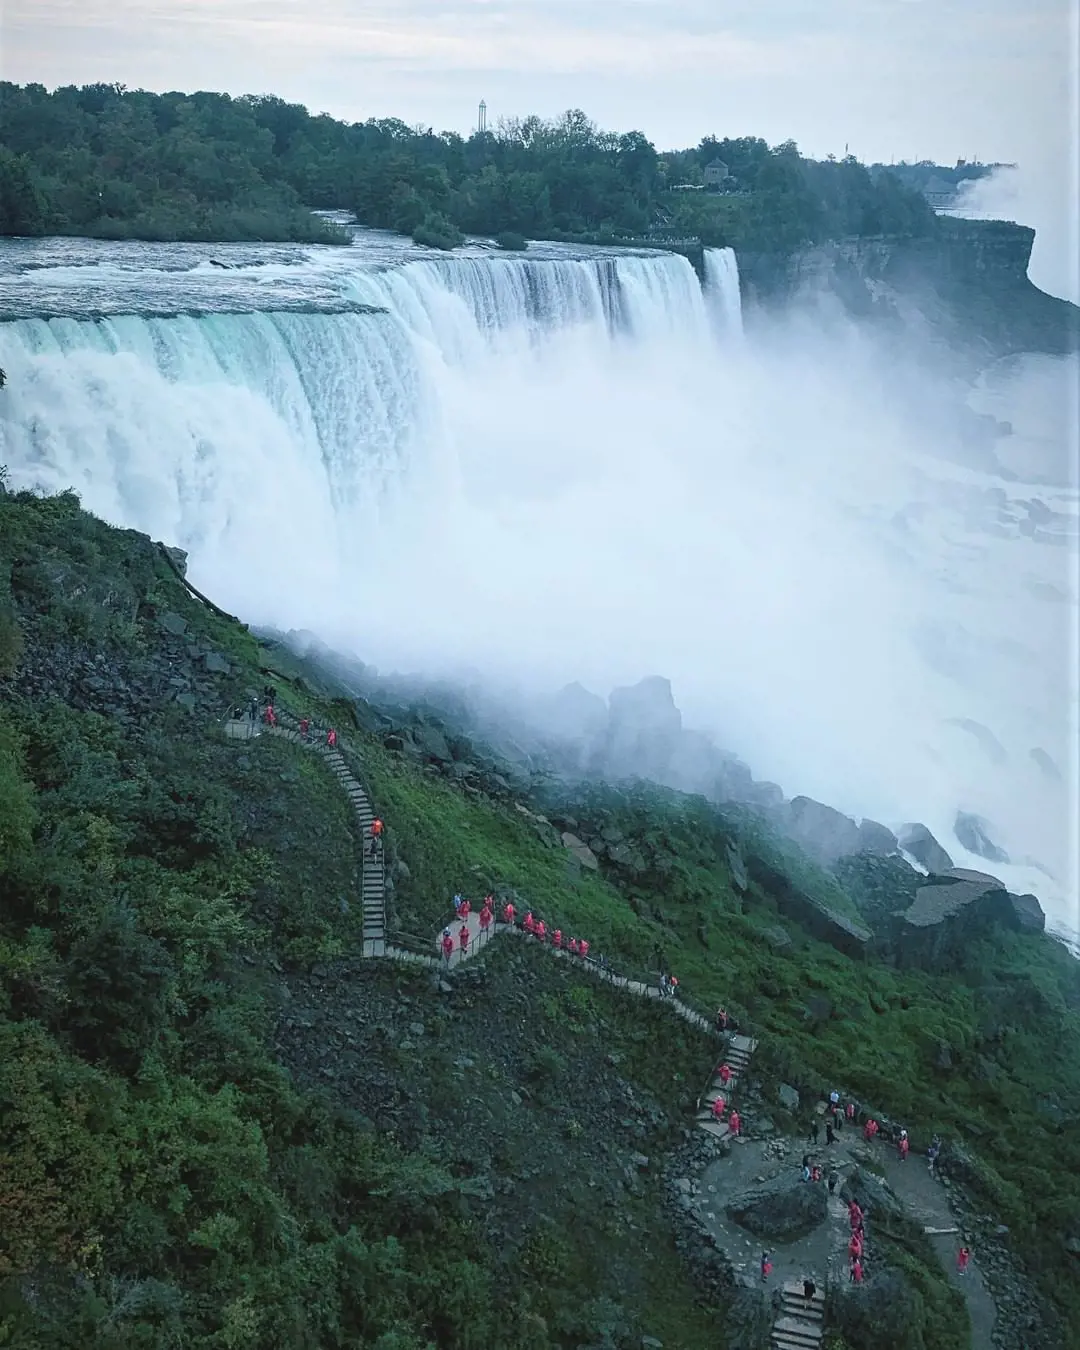 Views from the observation deck in Niagara Falls State Park